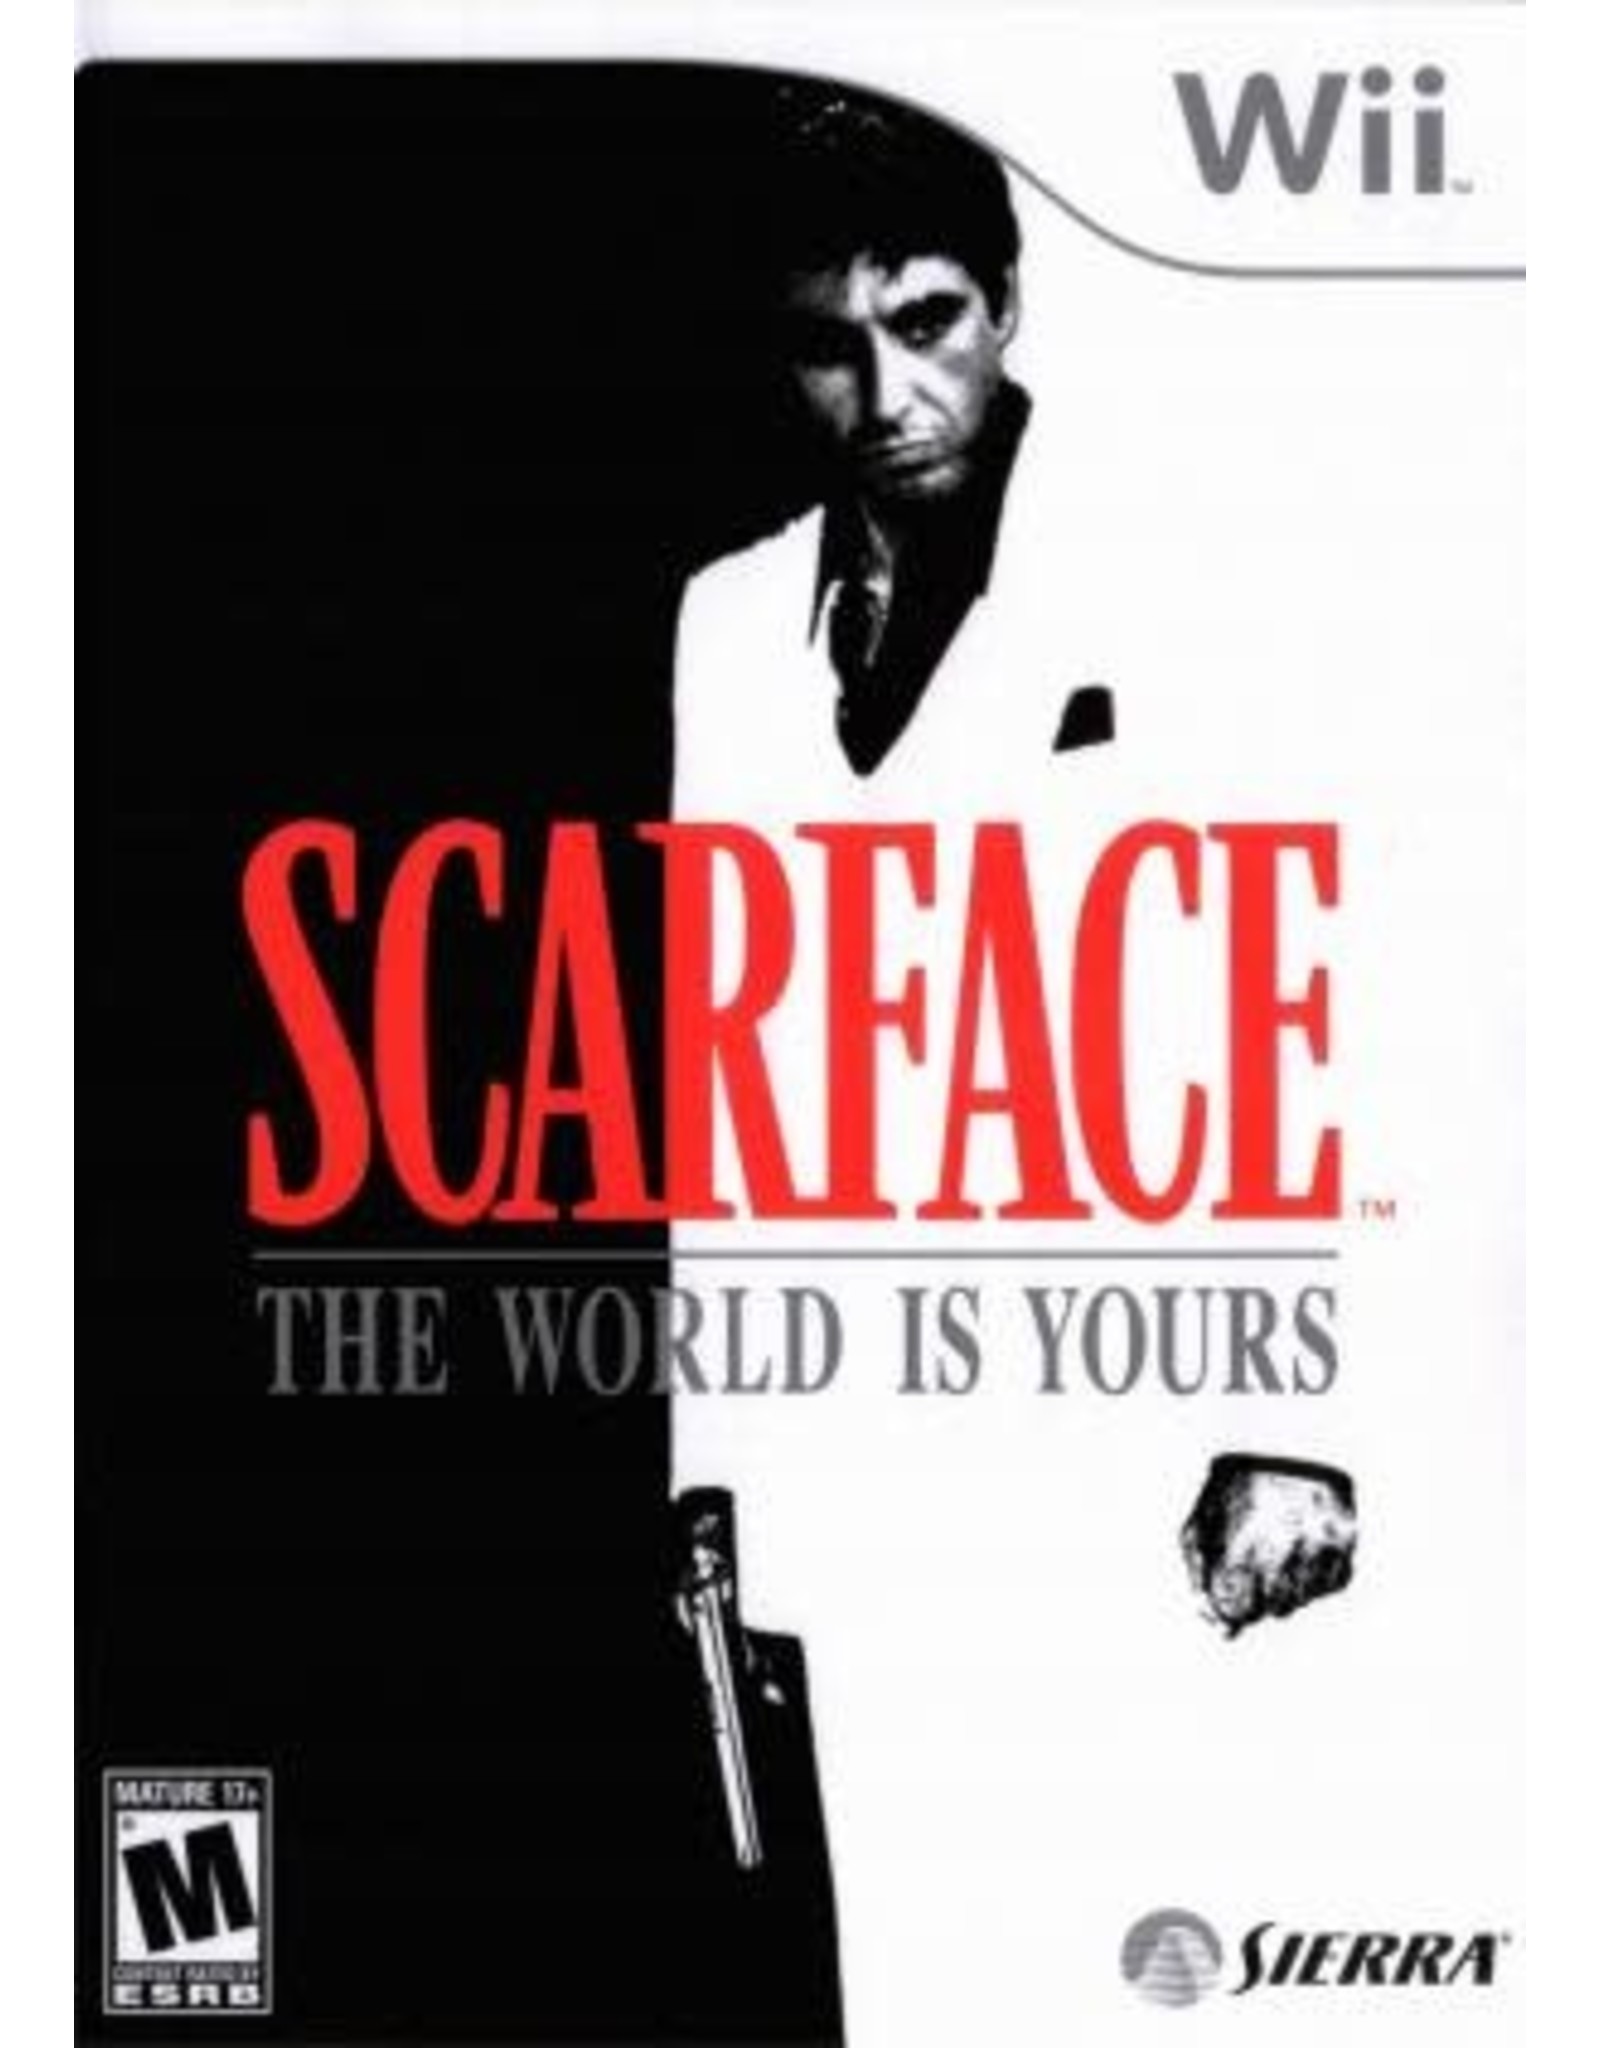 Wii Scarface the World is Yours (CiB)